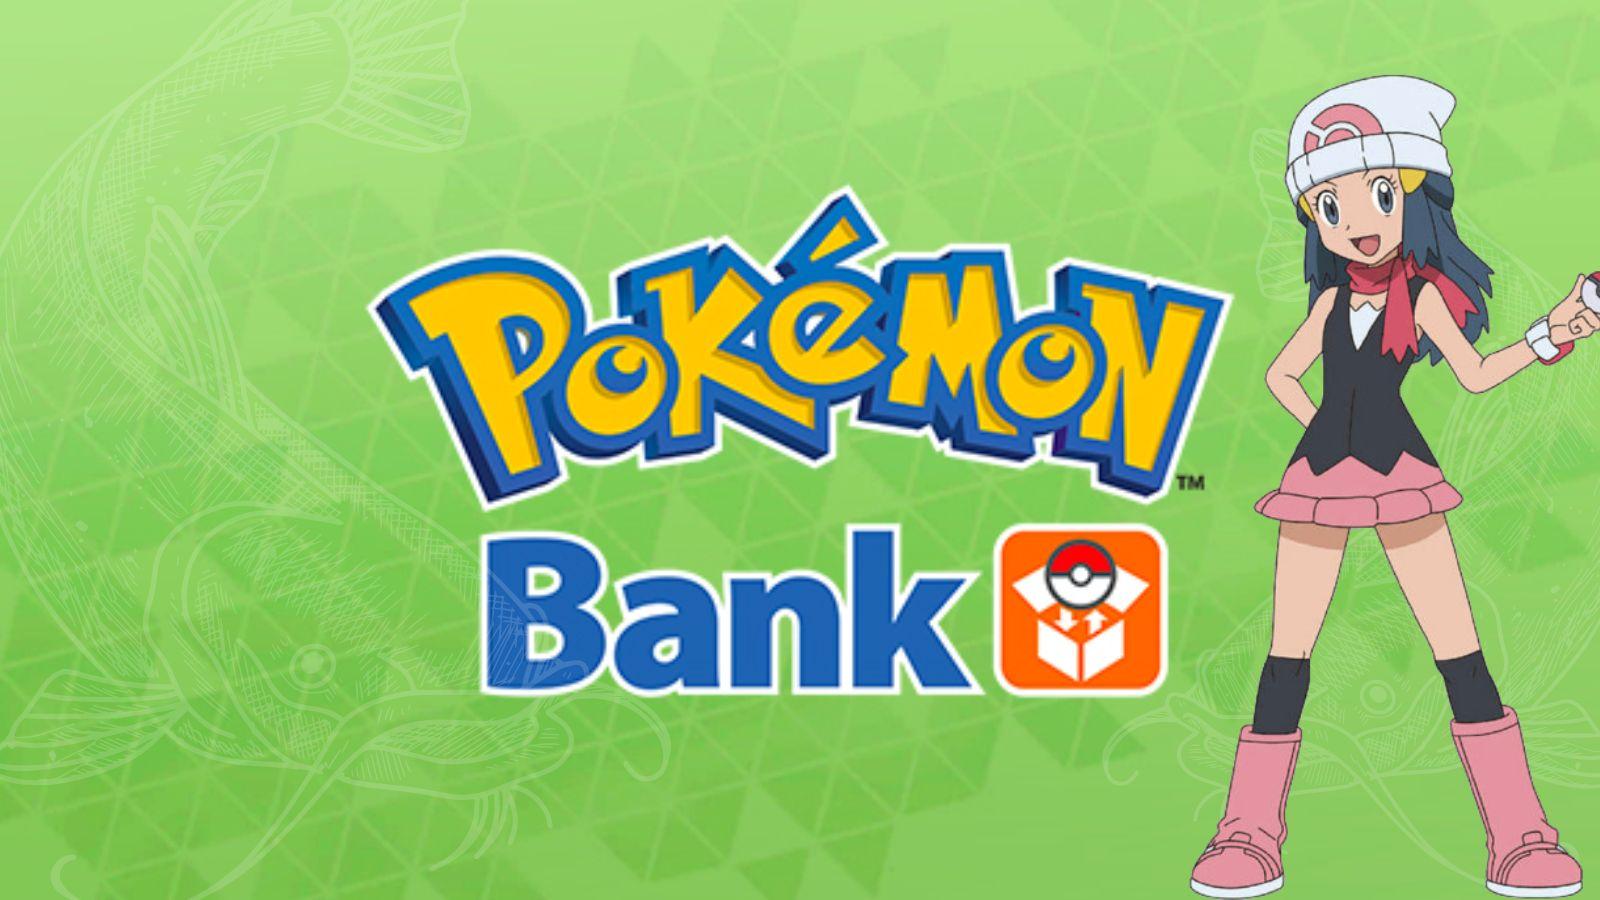 Pokemon Bank logo with Dawn in the front